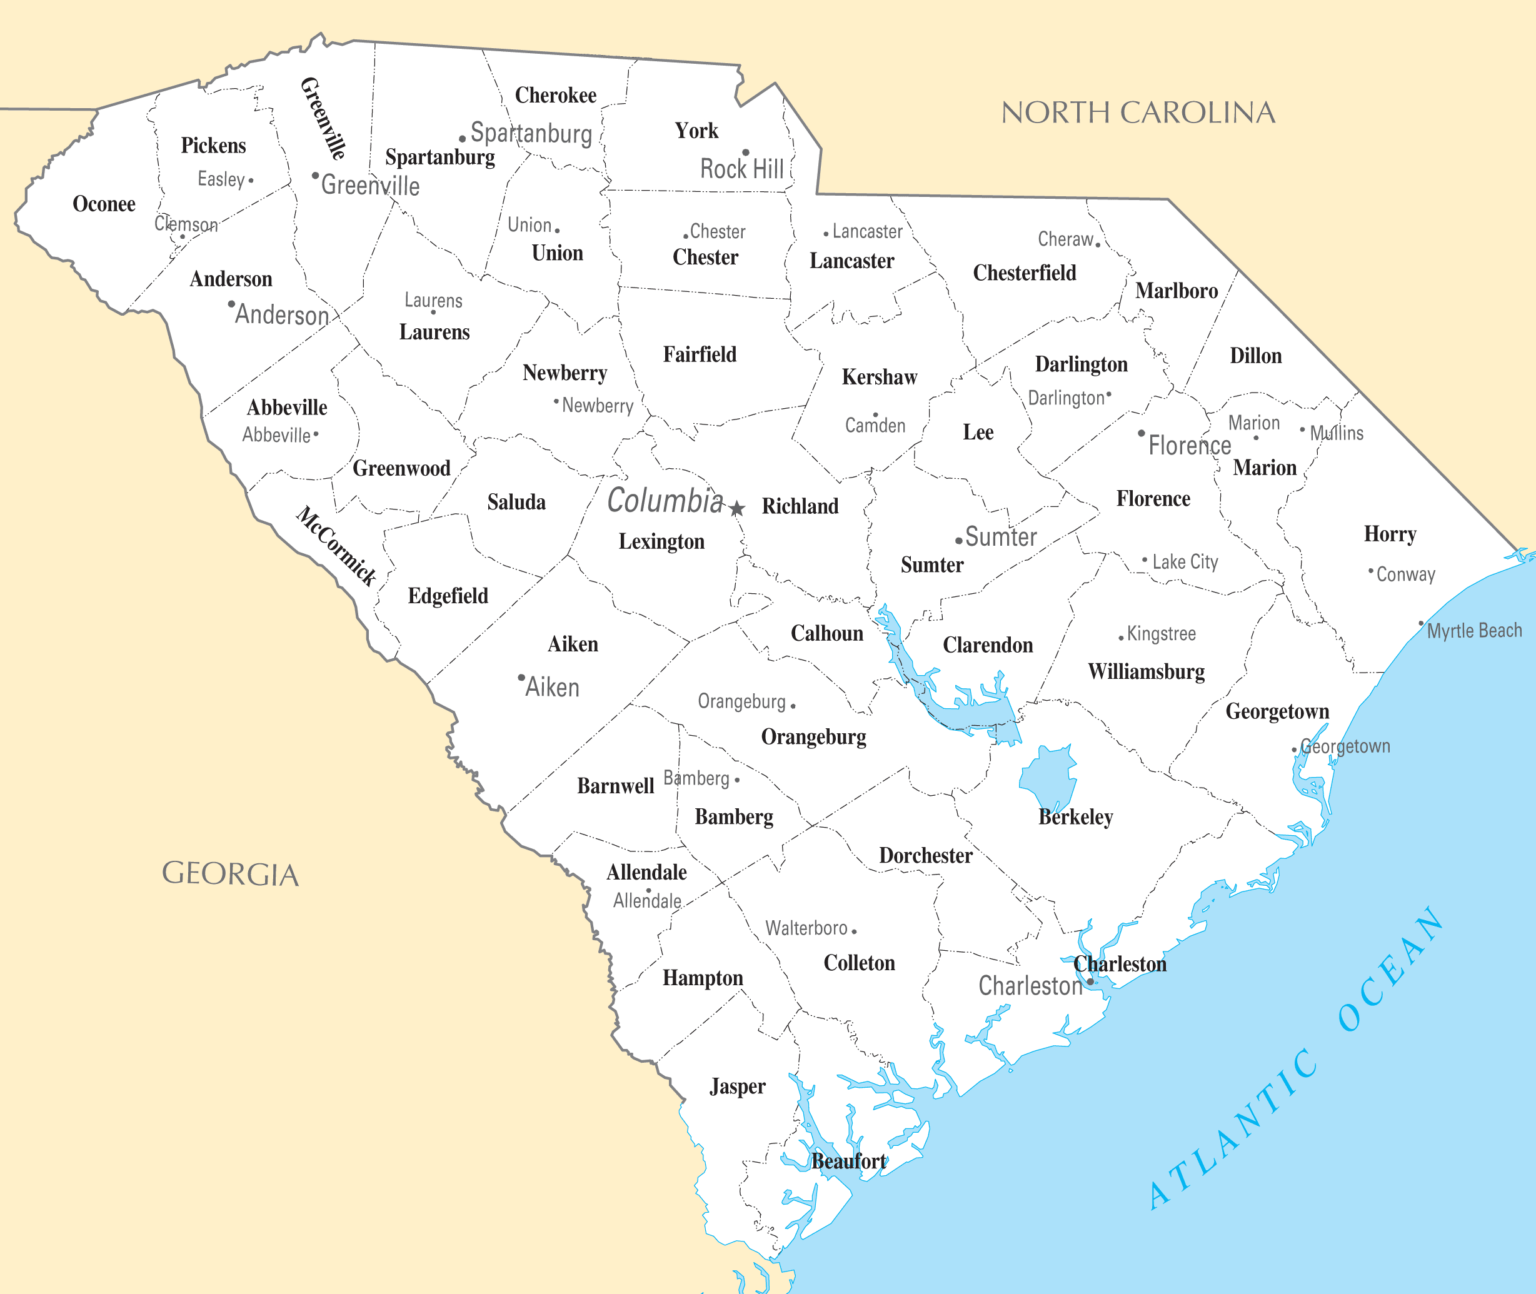 South Carolina Cities And Towns Mapsof Printable Map Of The United States 0956